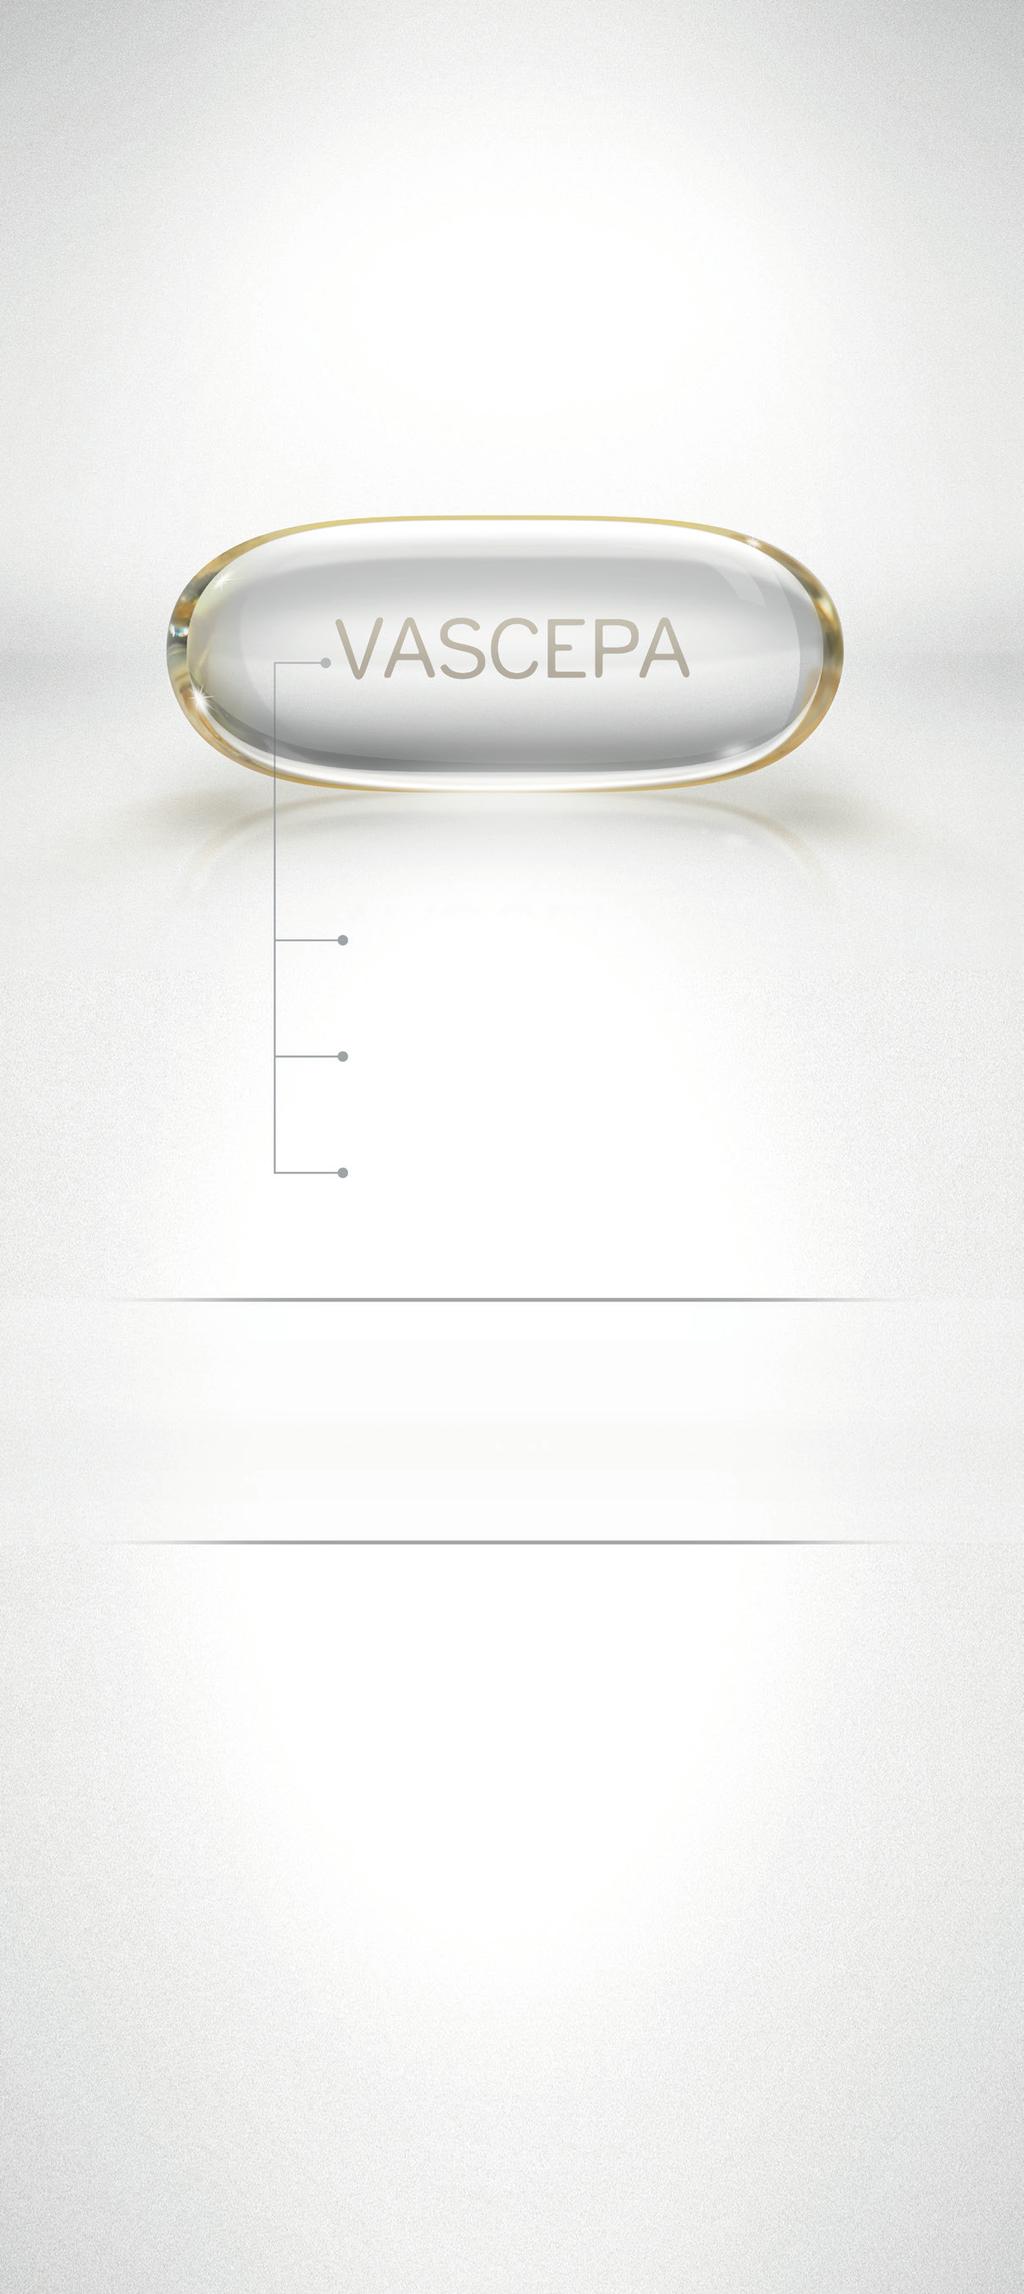 Trying to lower very high triglycerides? The choice is clear. Pure EPA Omega-3 Clinically proven FDA-approved Ask your doctor about VASCEPA, the first and only Pure EPA prescription Omega-3.